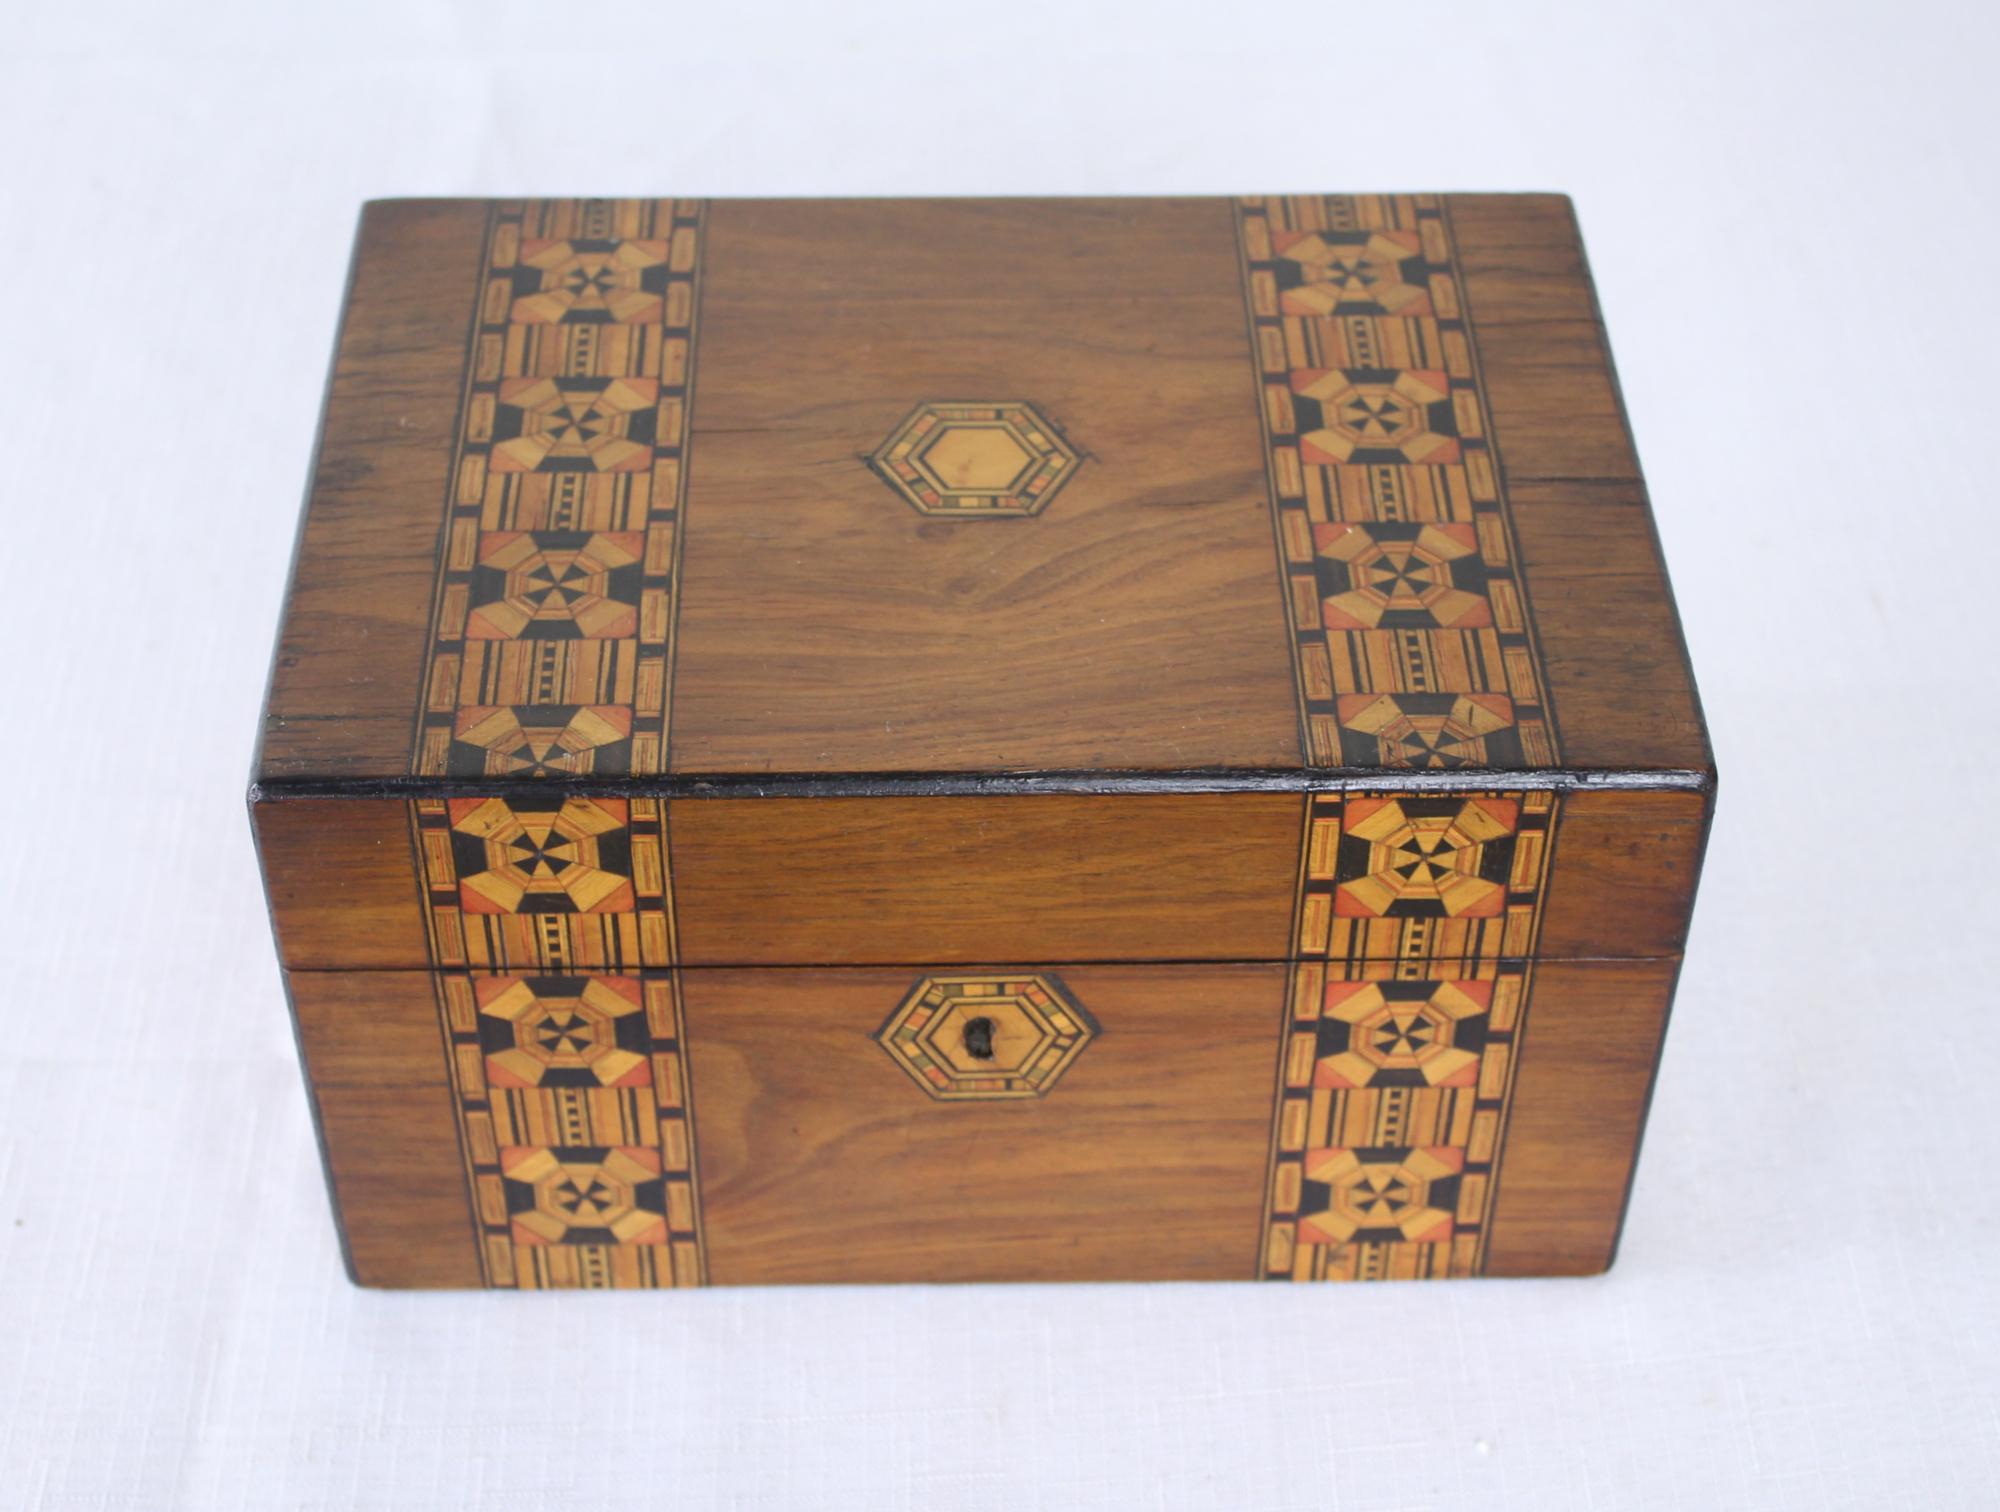 A decorative walnut Tumbridgeware jewelry box. Tumbridgeware being characterized as a form of decoratively inlaid woodwork, typically in the form of boxes, that is characteristic of Tumbridge and the spa town of Royal Tumbridge Wells in Kent in the